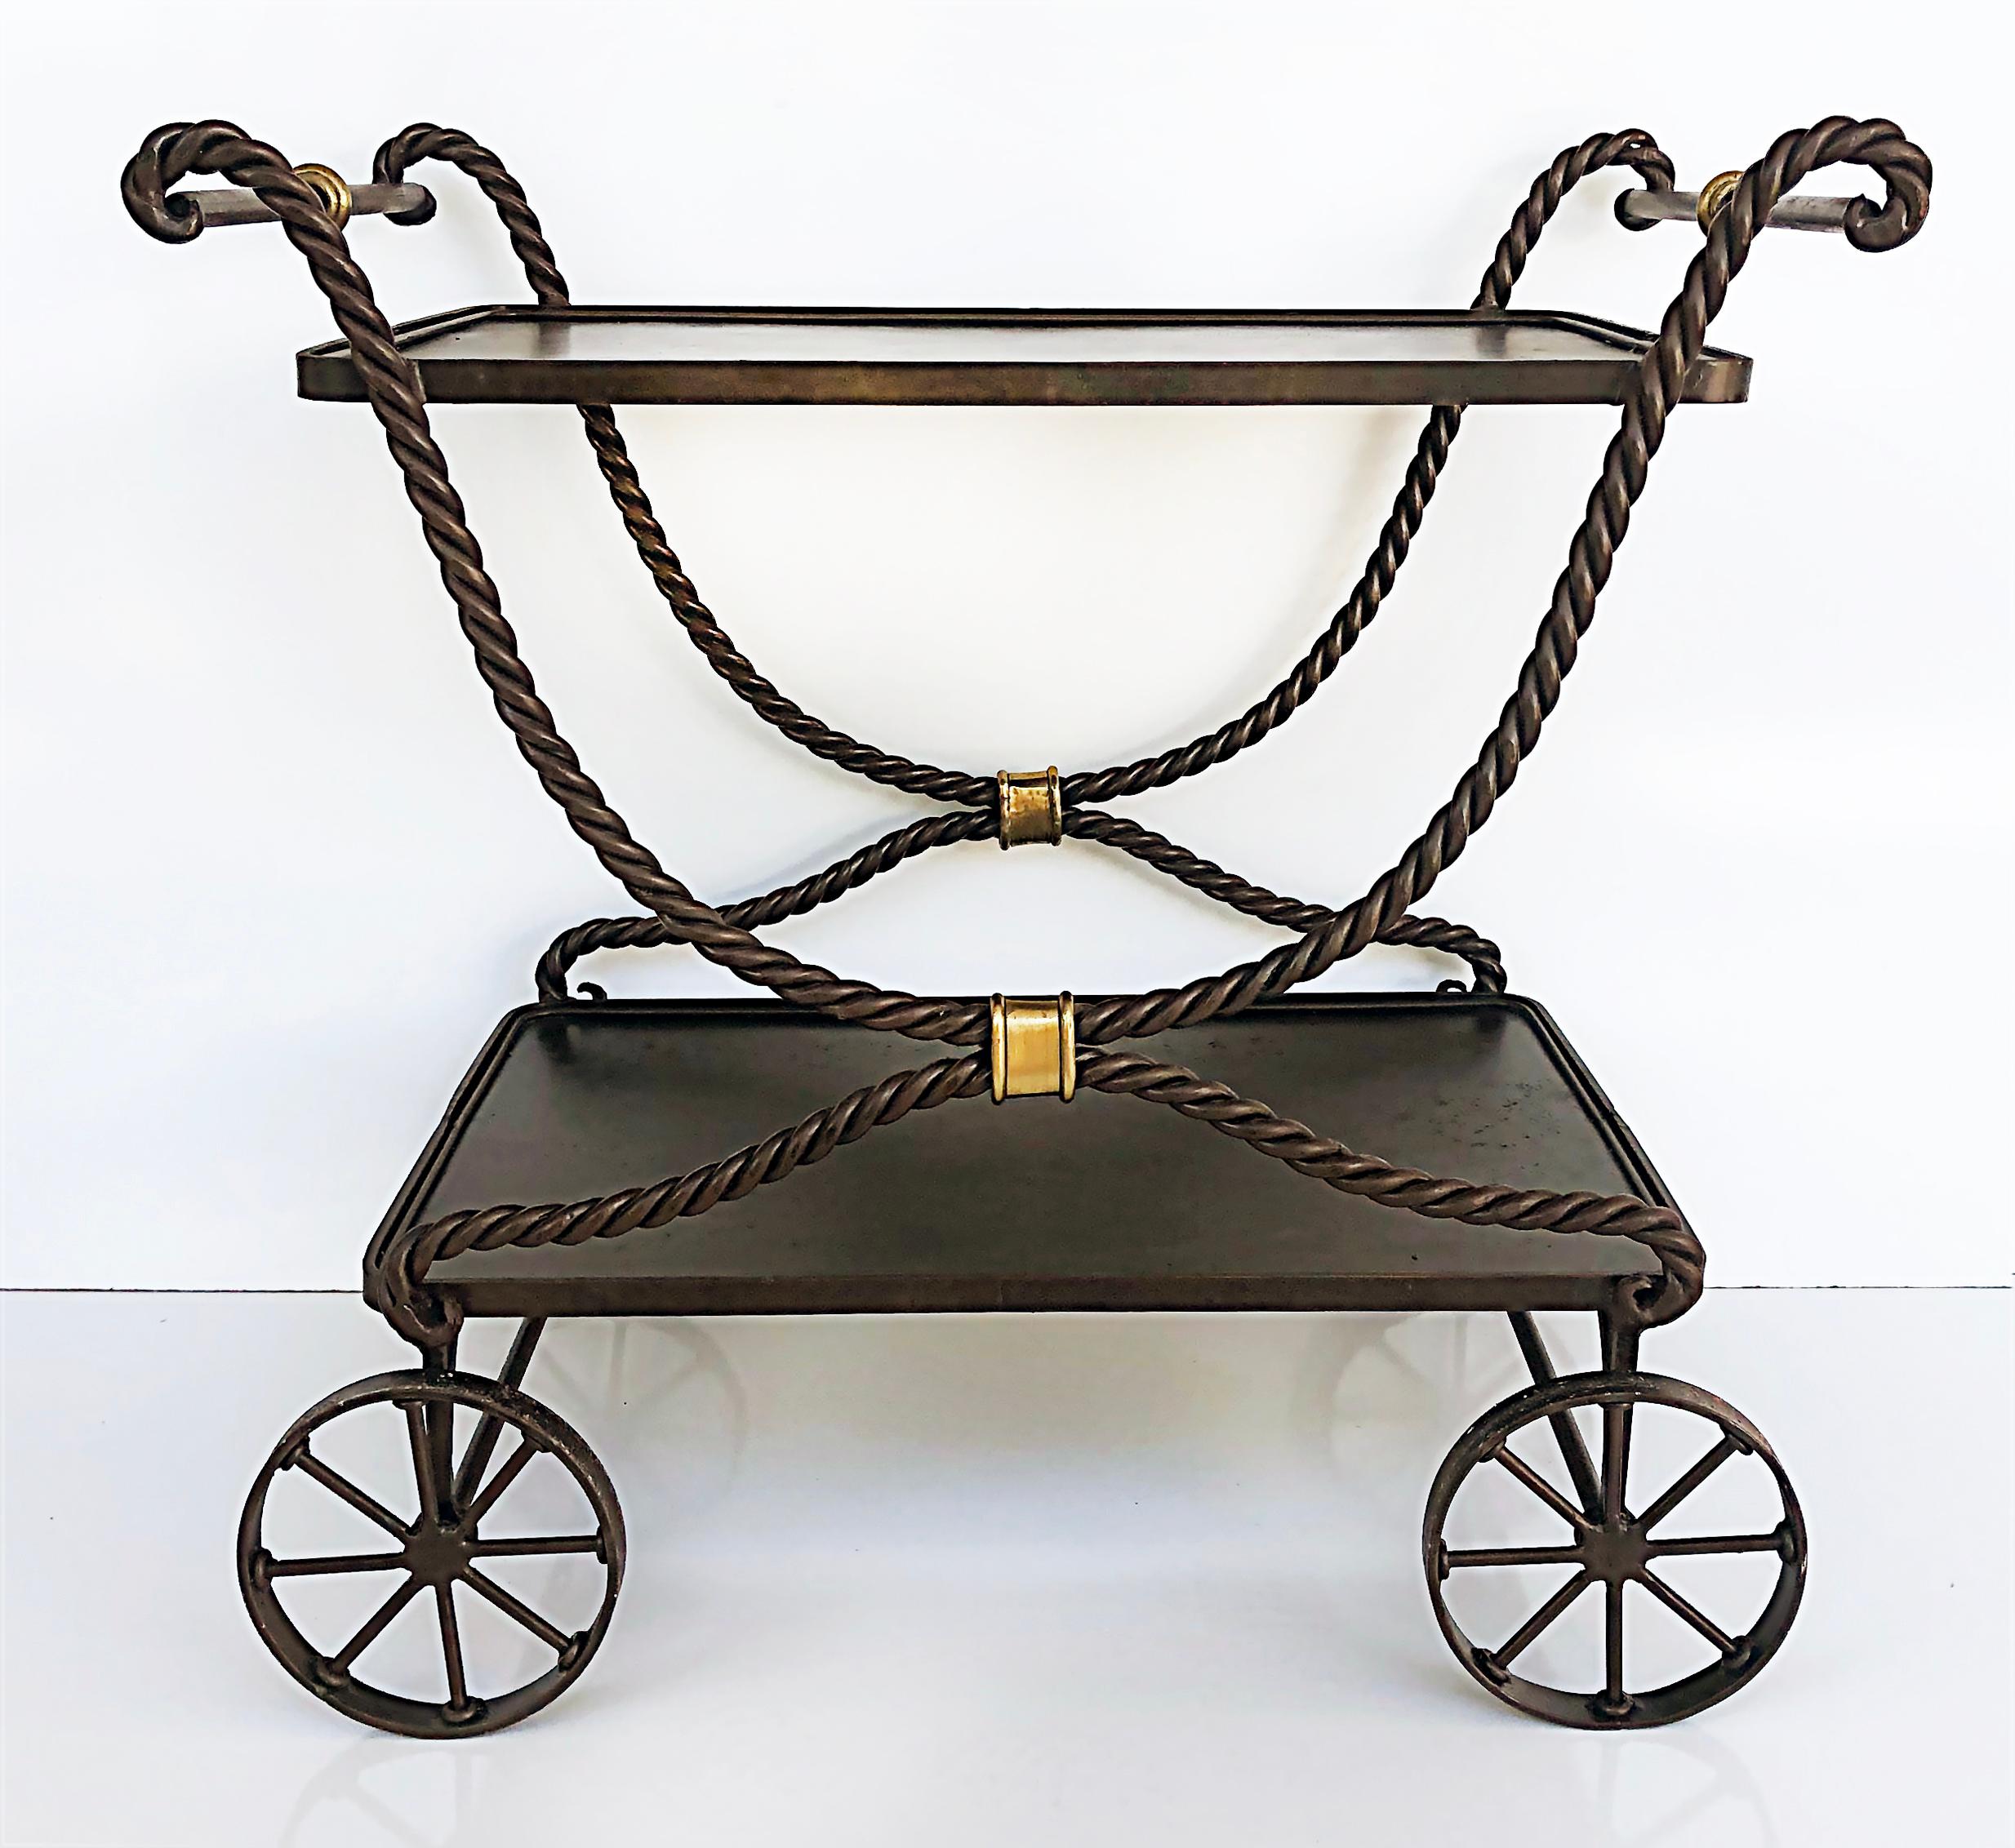 Wrought iron rope bar cart tea trolley Maitland Smith attributed.

Offered for sale is a Maitland Smith attributed wrought iron twisted rope bar cart or tea trolley with wheels. The wrought iron has brass accent details. The wheels are quite